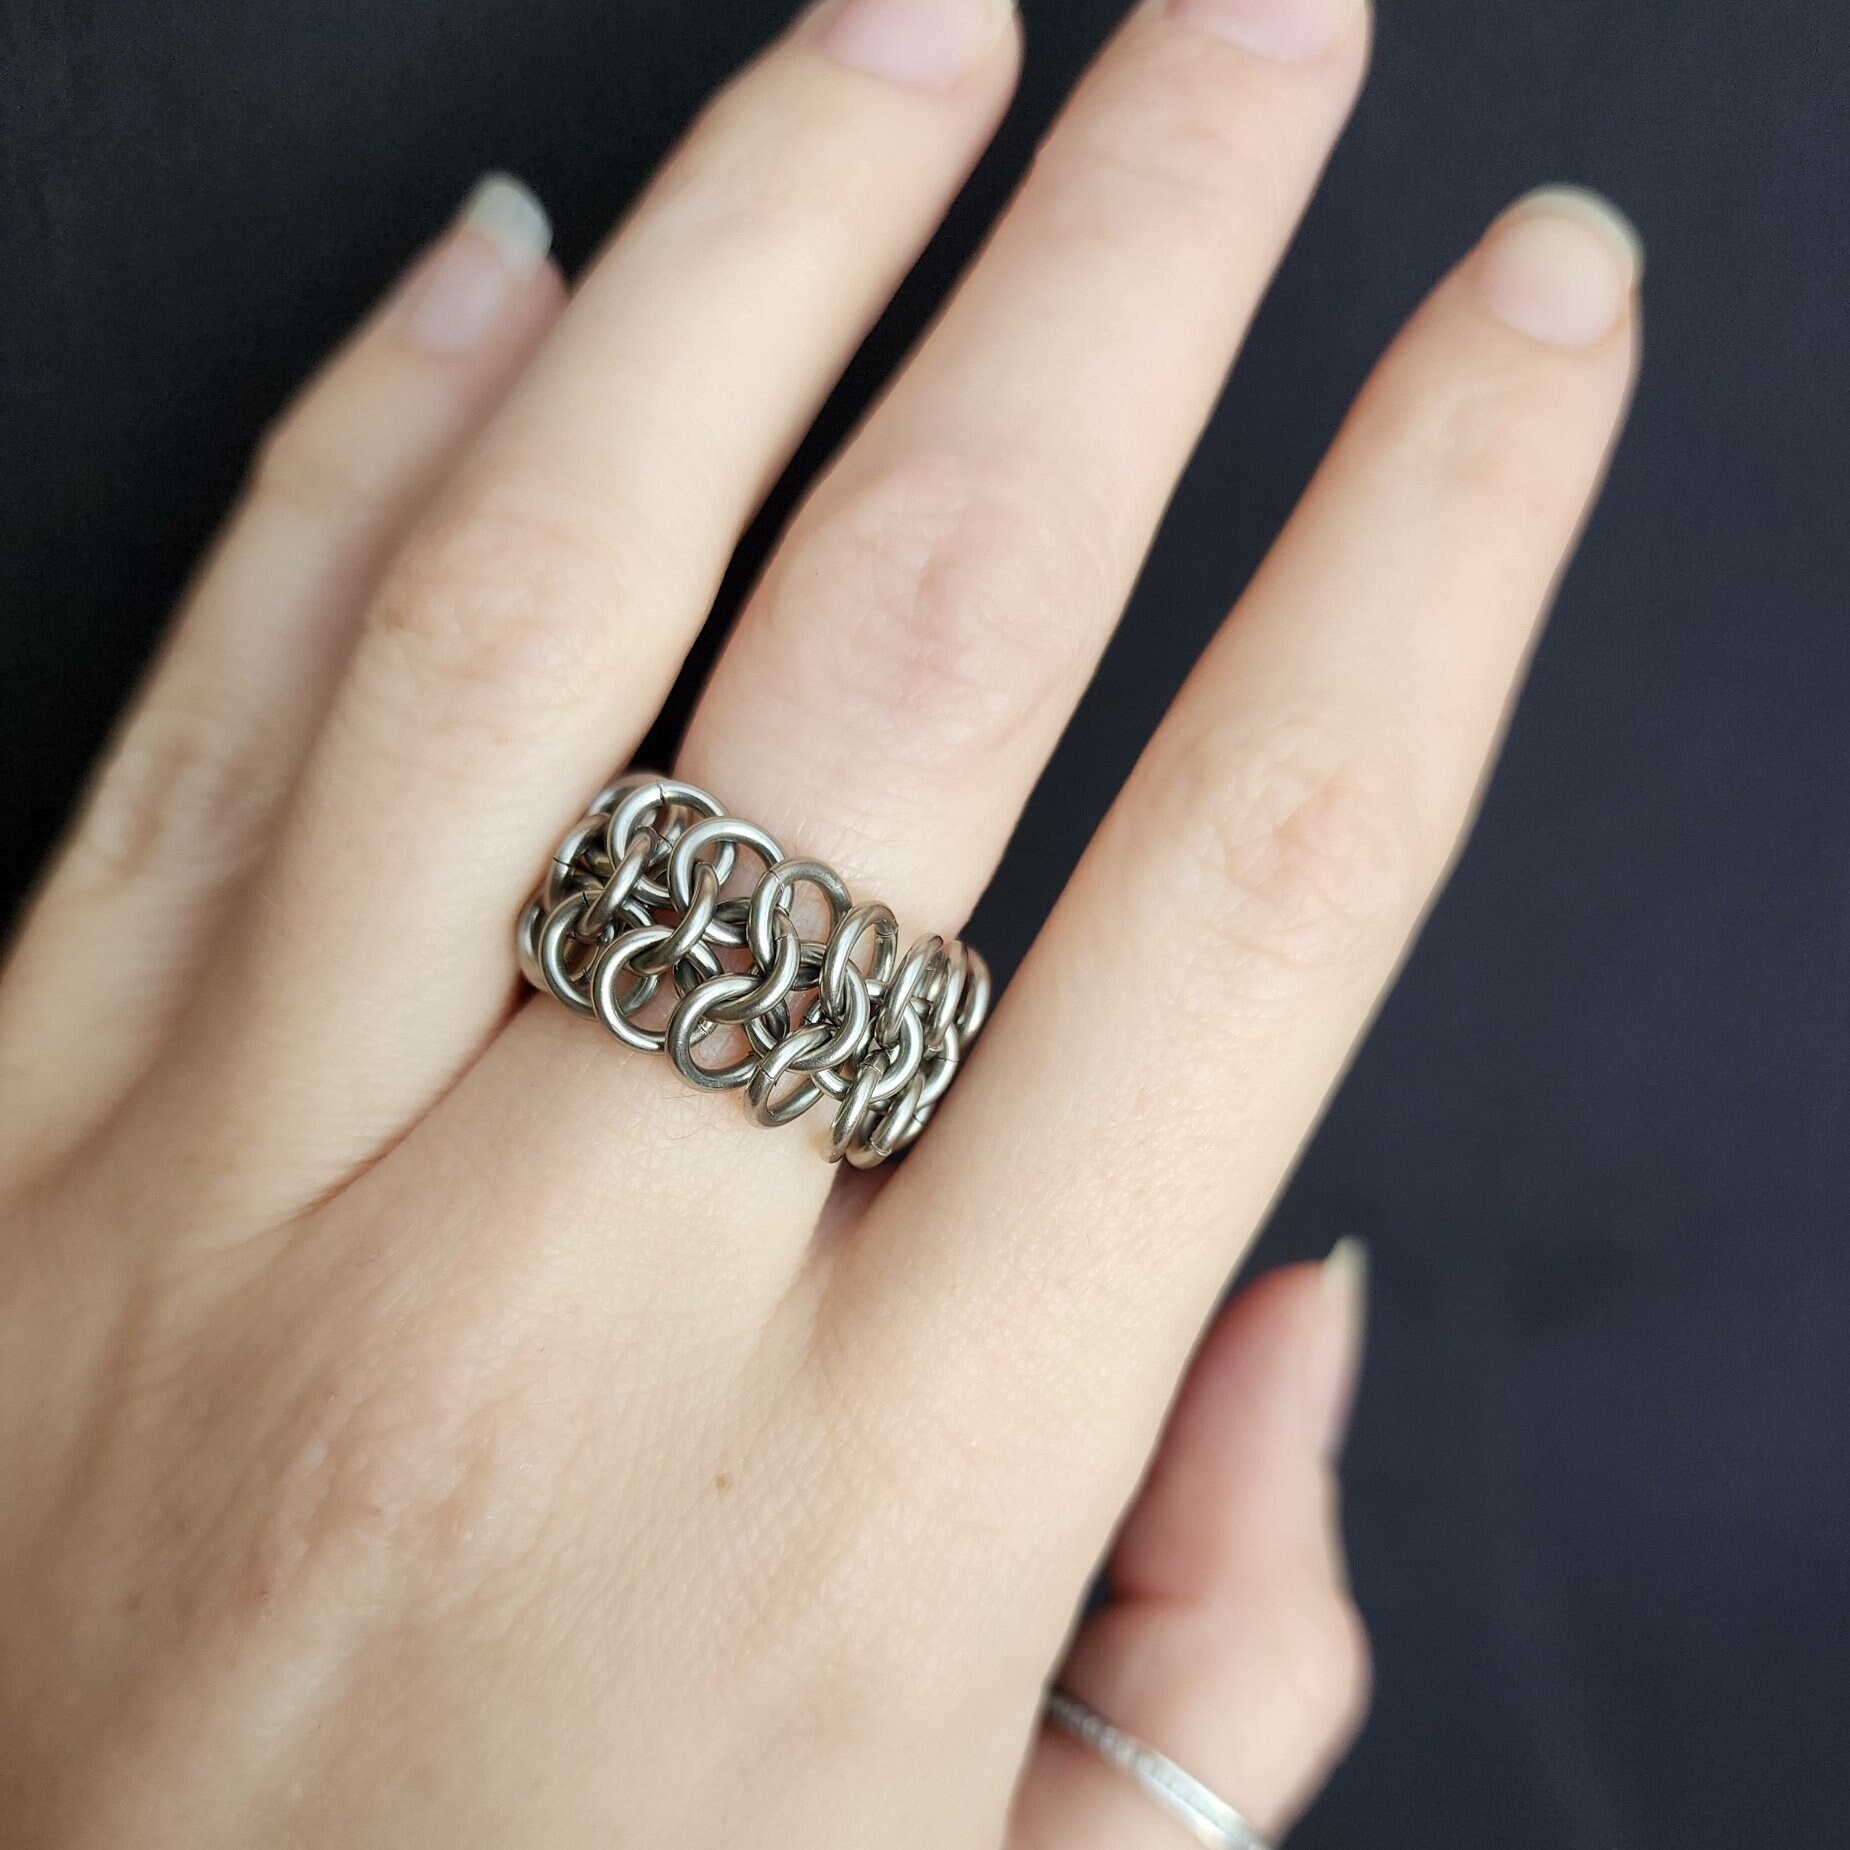 Chain Maille Ring Tutorial DIY Chainmail 